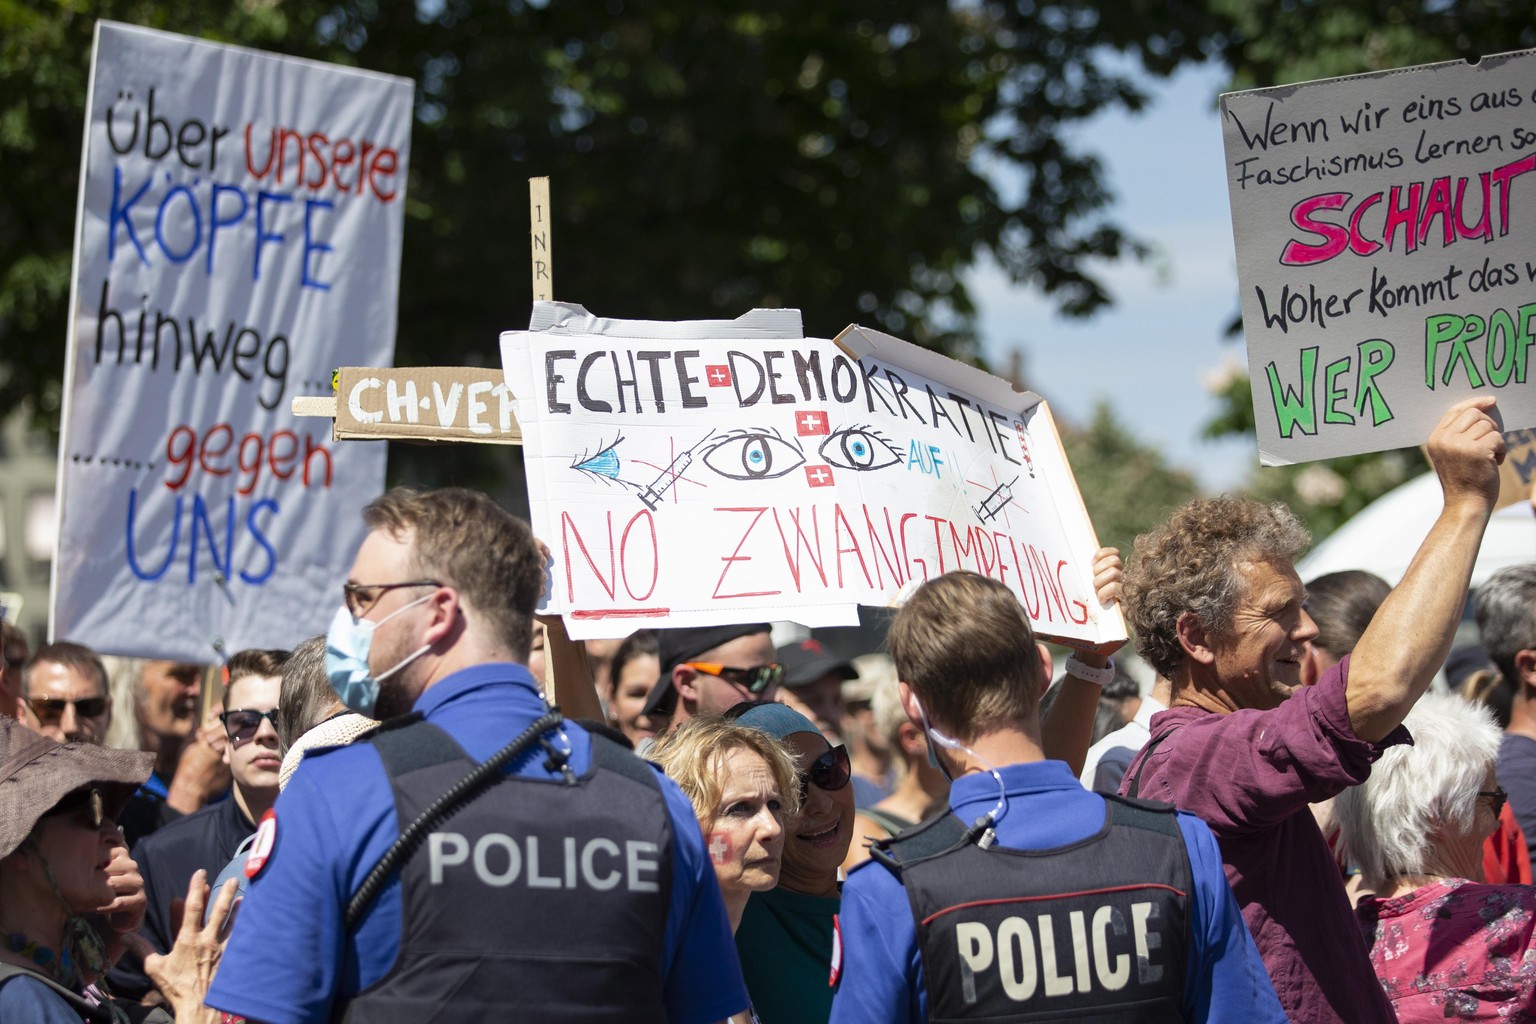 epa08412069 Several hundred demonstrators gathered in the center of Bern, Switzerland, to protest against the ongoing Corona-Lockdown, Saturday, May 9, 2020. The demonstrators asked for more freedom a ...